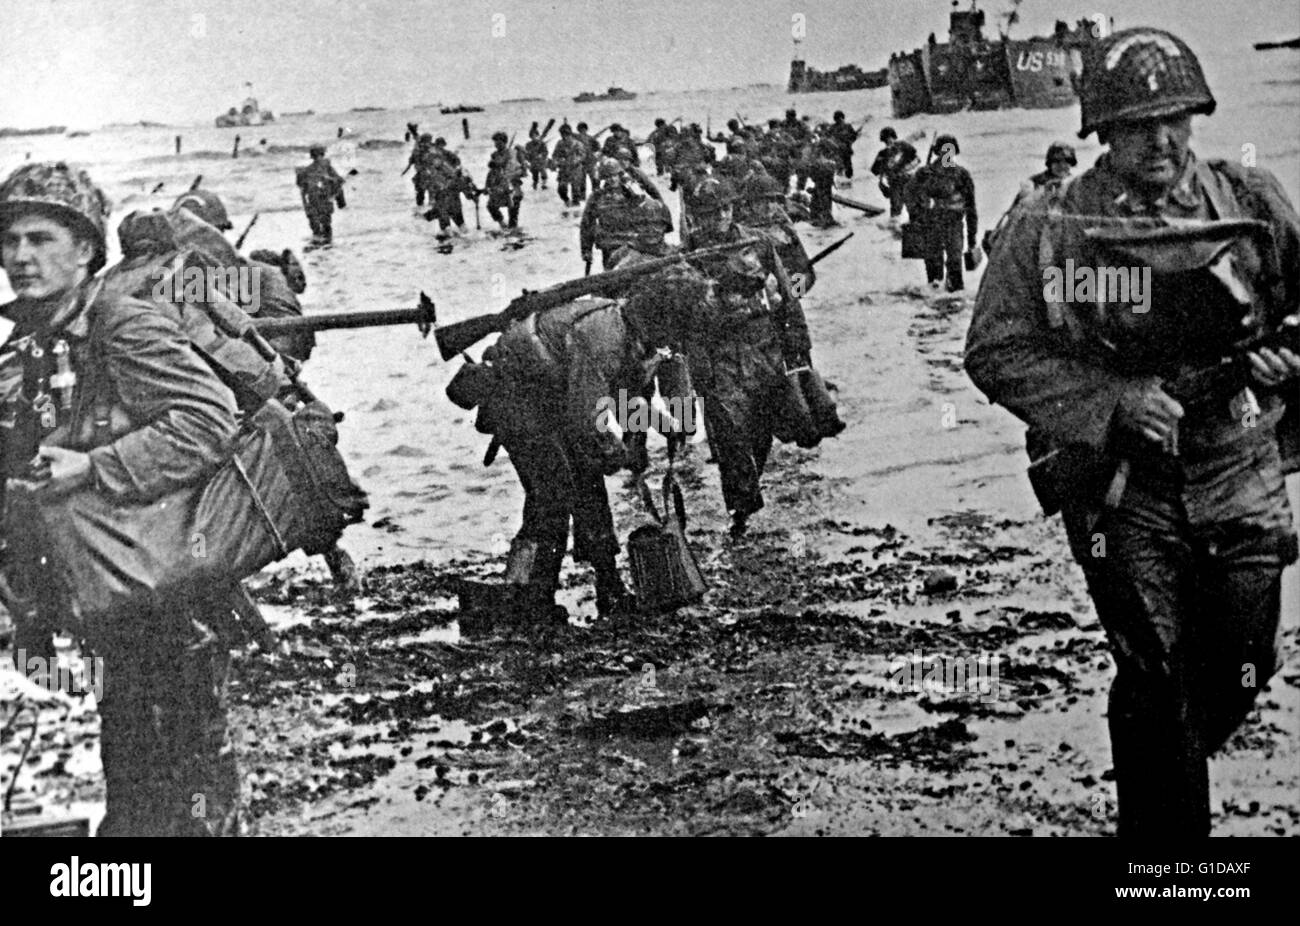 American soldiers go ashore during the Normandy landings. landing operations on Tuesday, 6 June 1944 (termed D-Day) of the Allied invasion of Normandy in Operation Overlord during World War II. Stock Photo